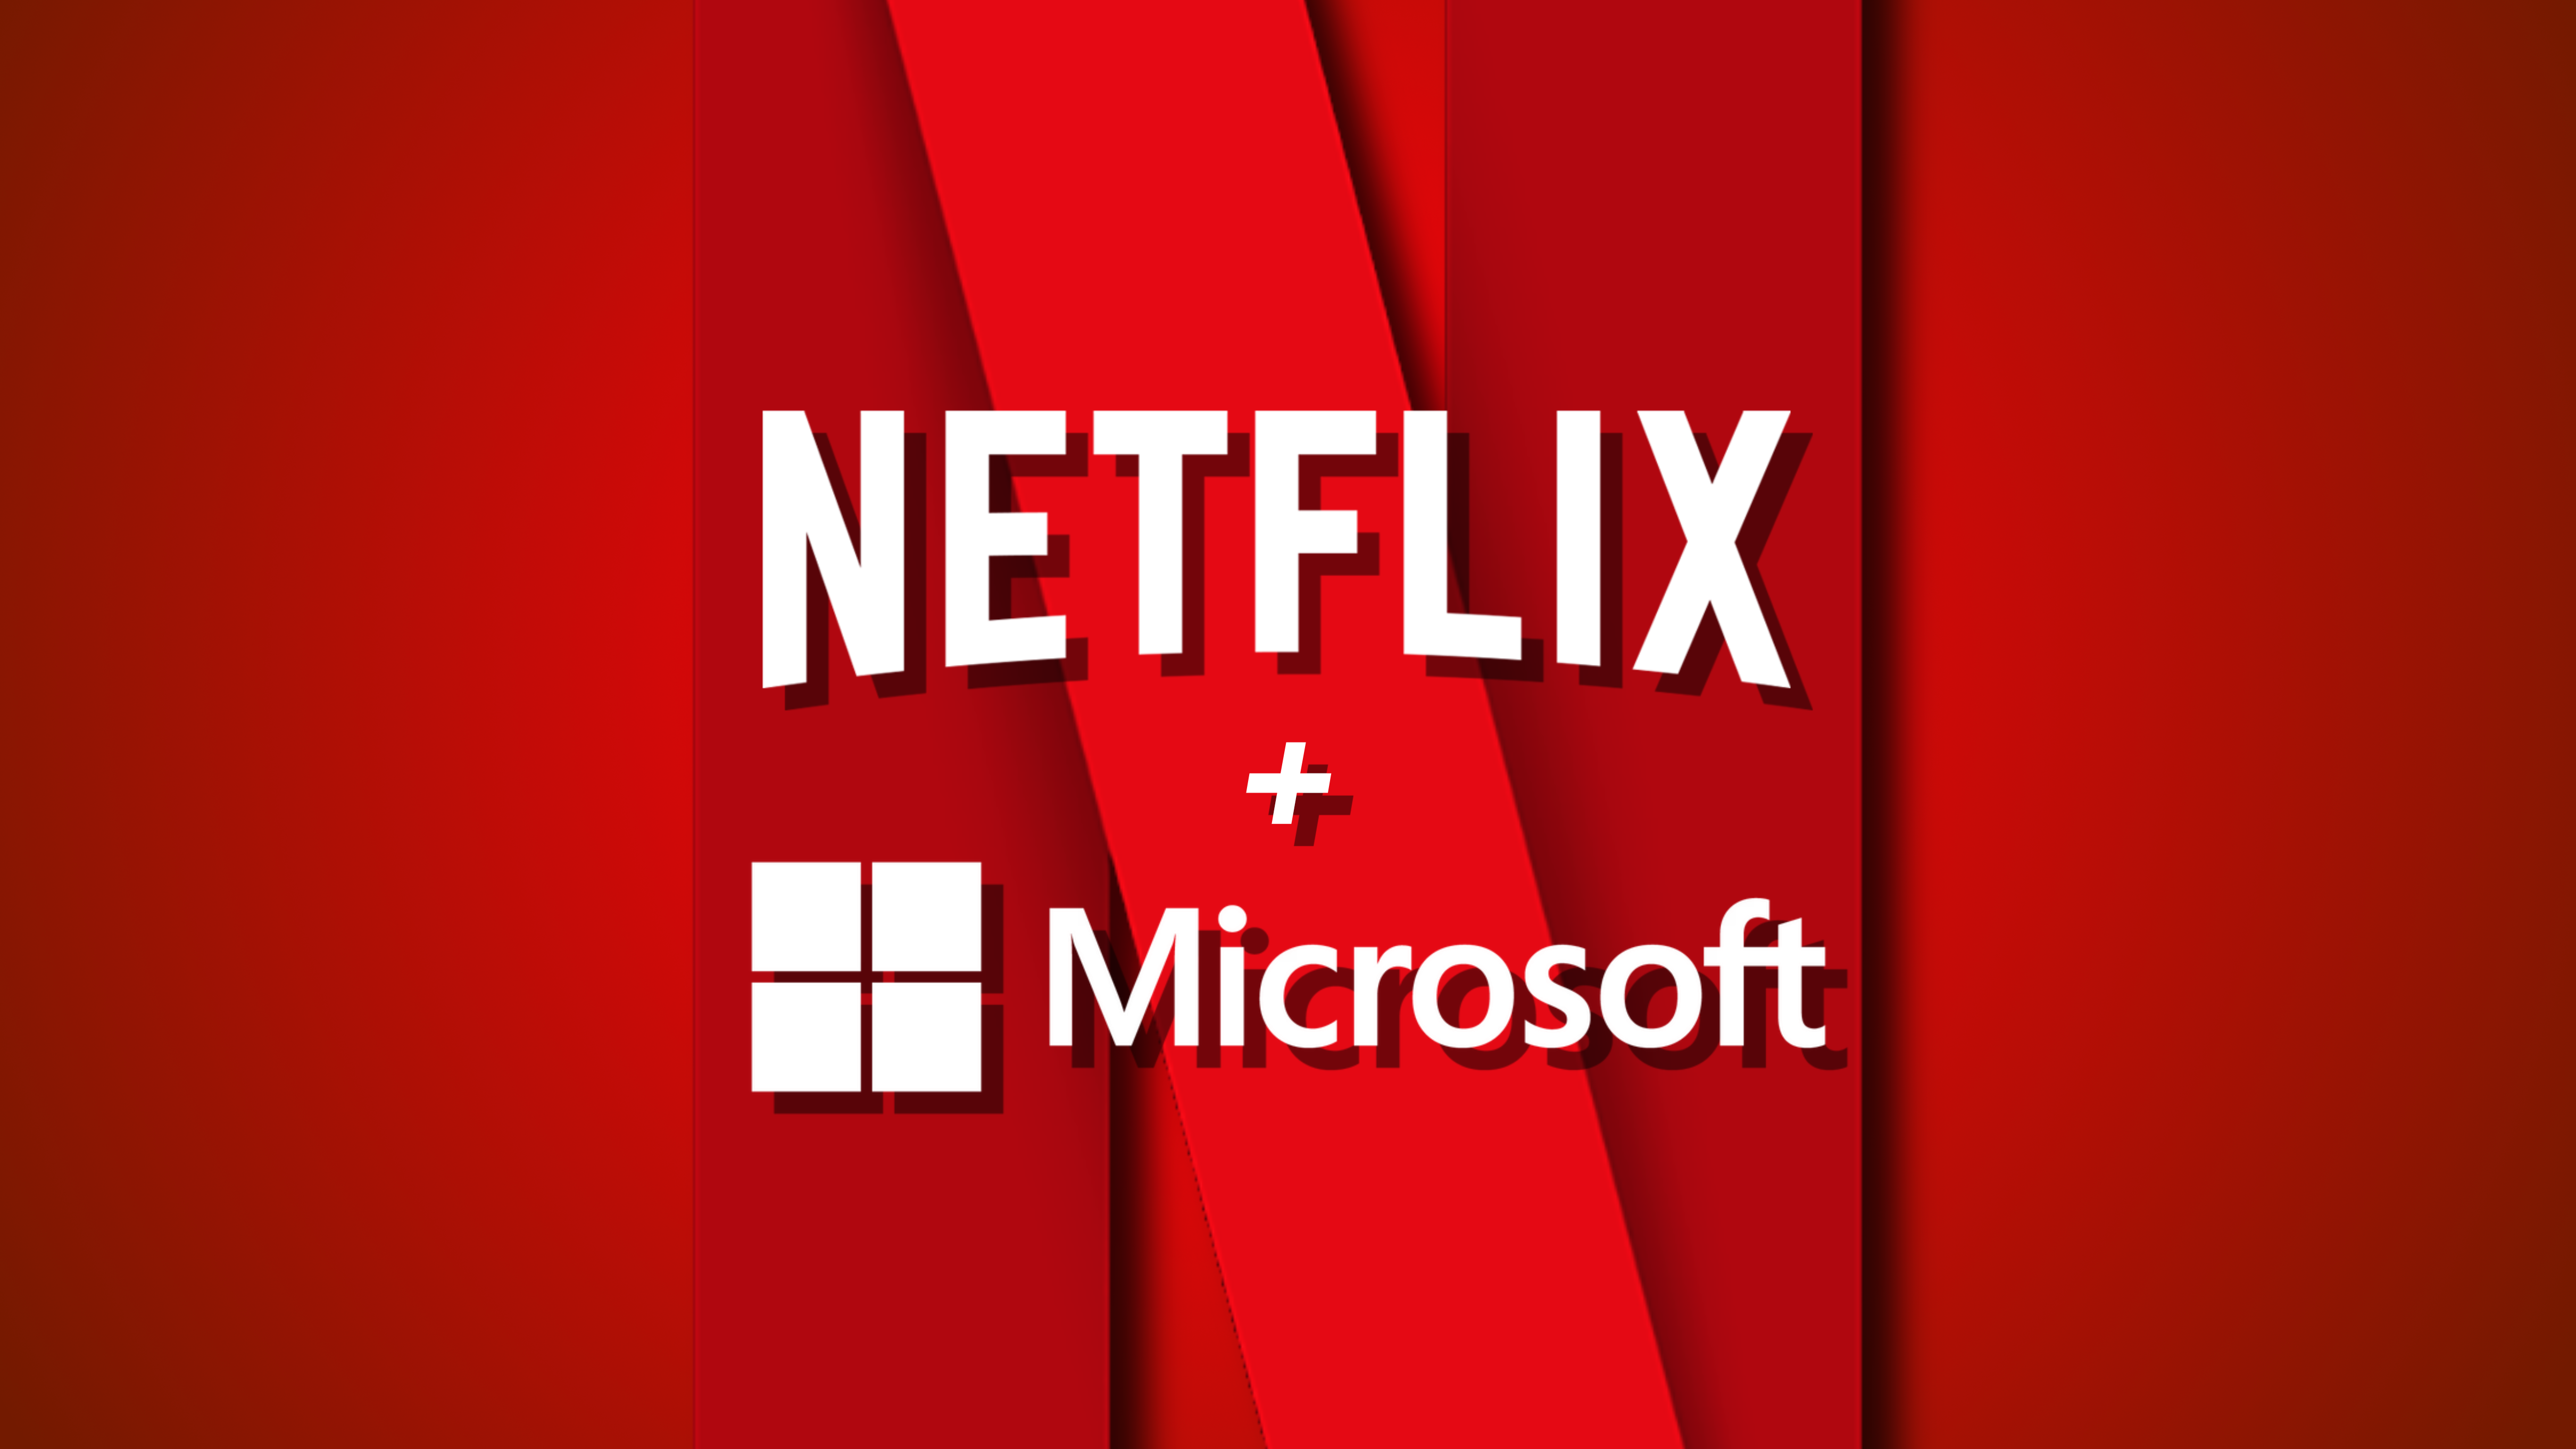 Netflix teams up with Microsoft for its upcoming ad-supported tier